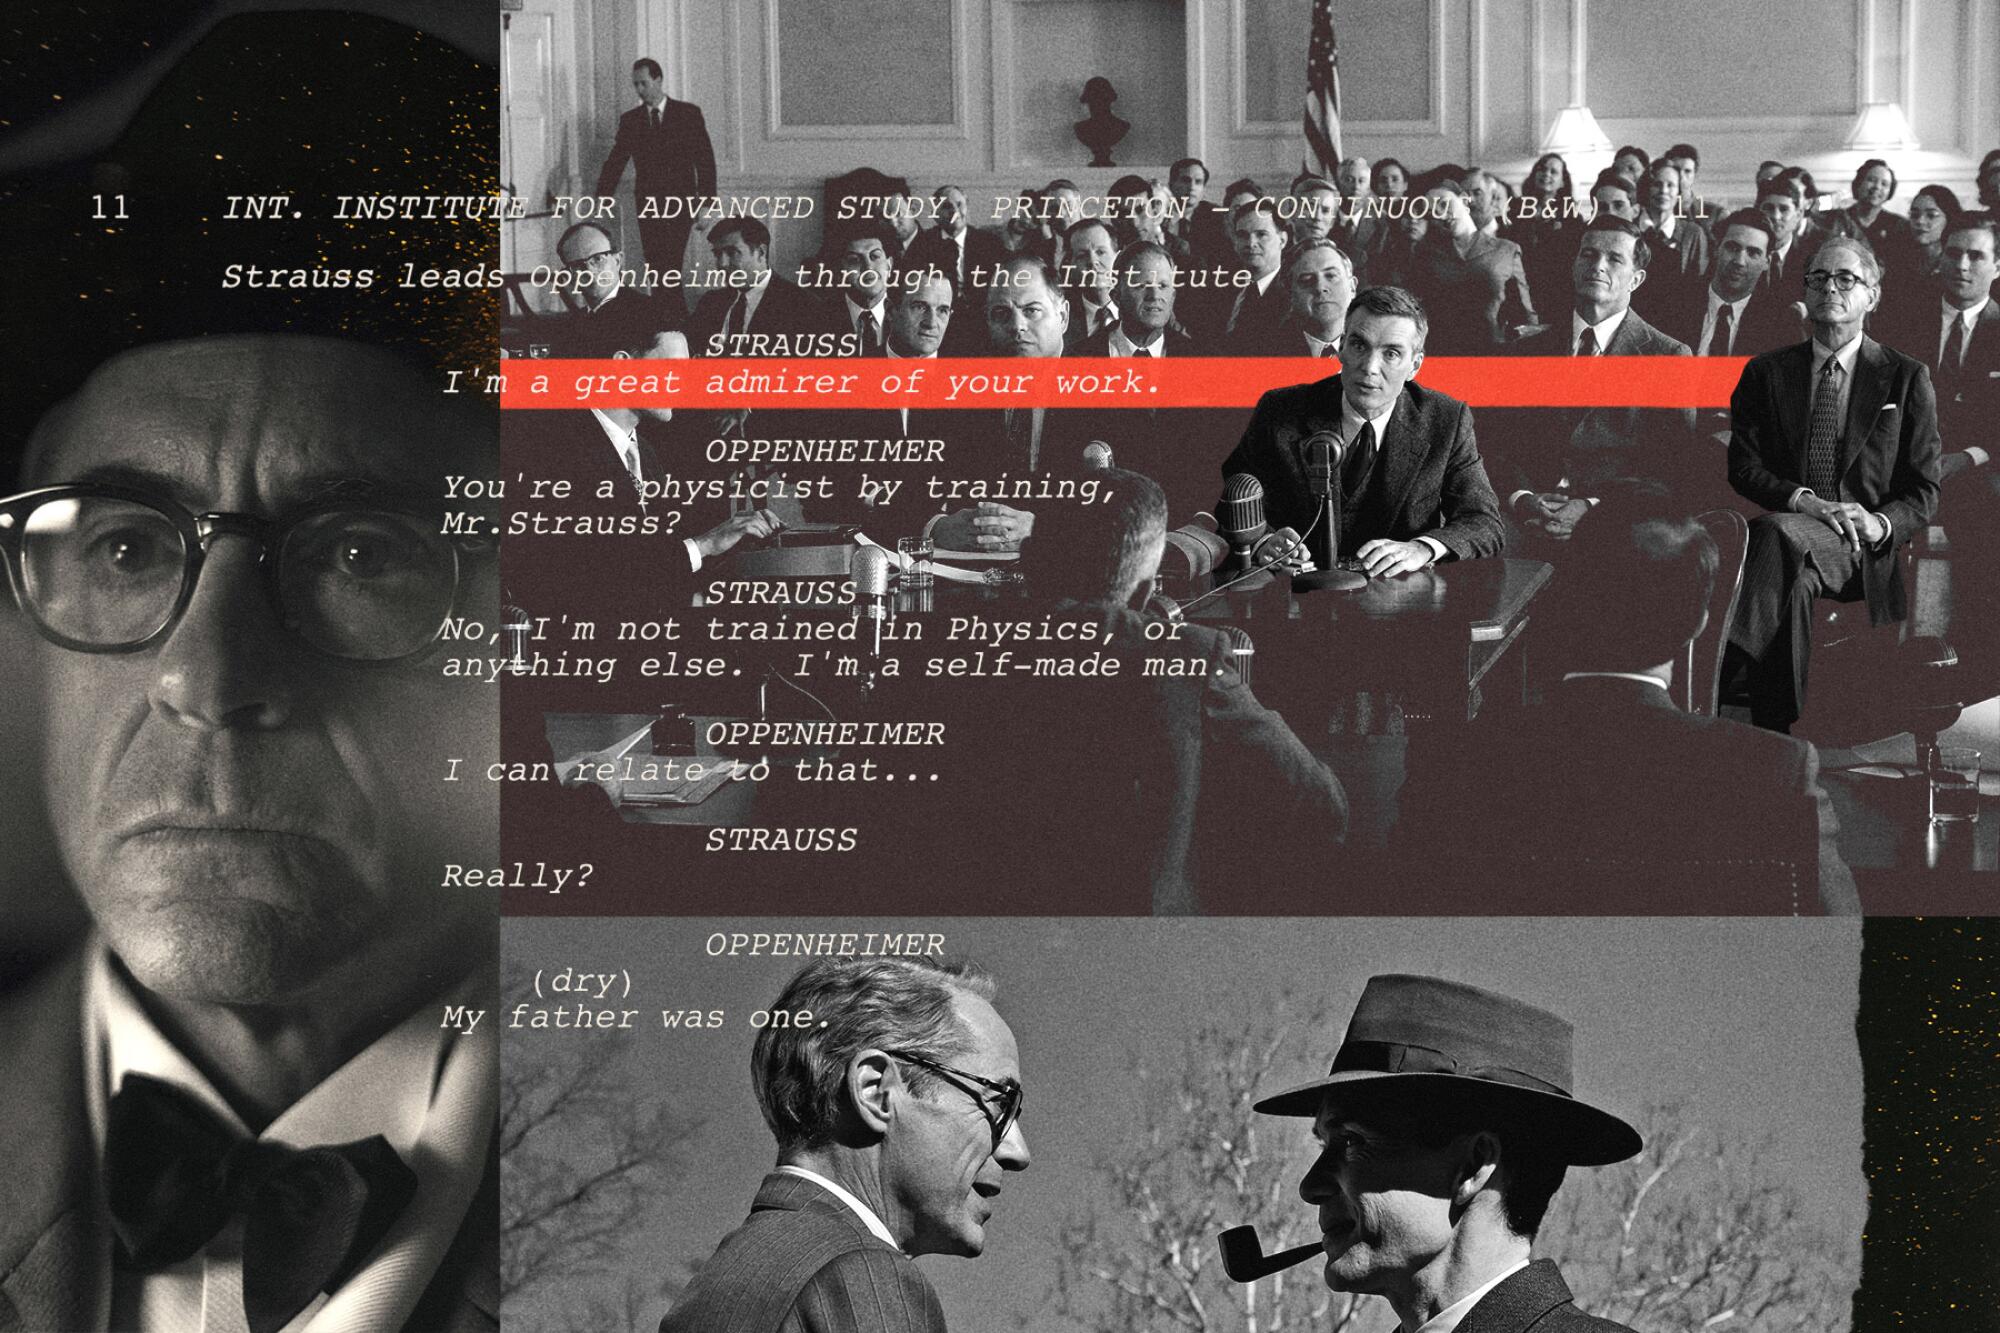 Photo illustration of Oppenheimer scripts and scenes